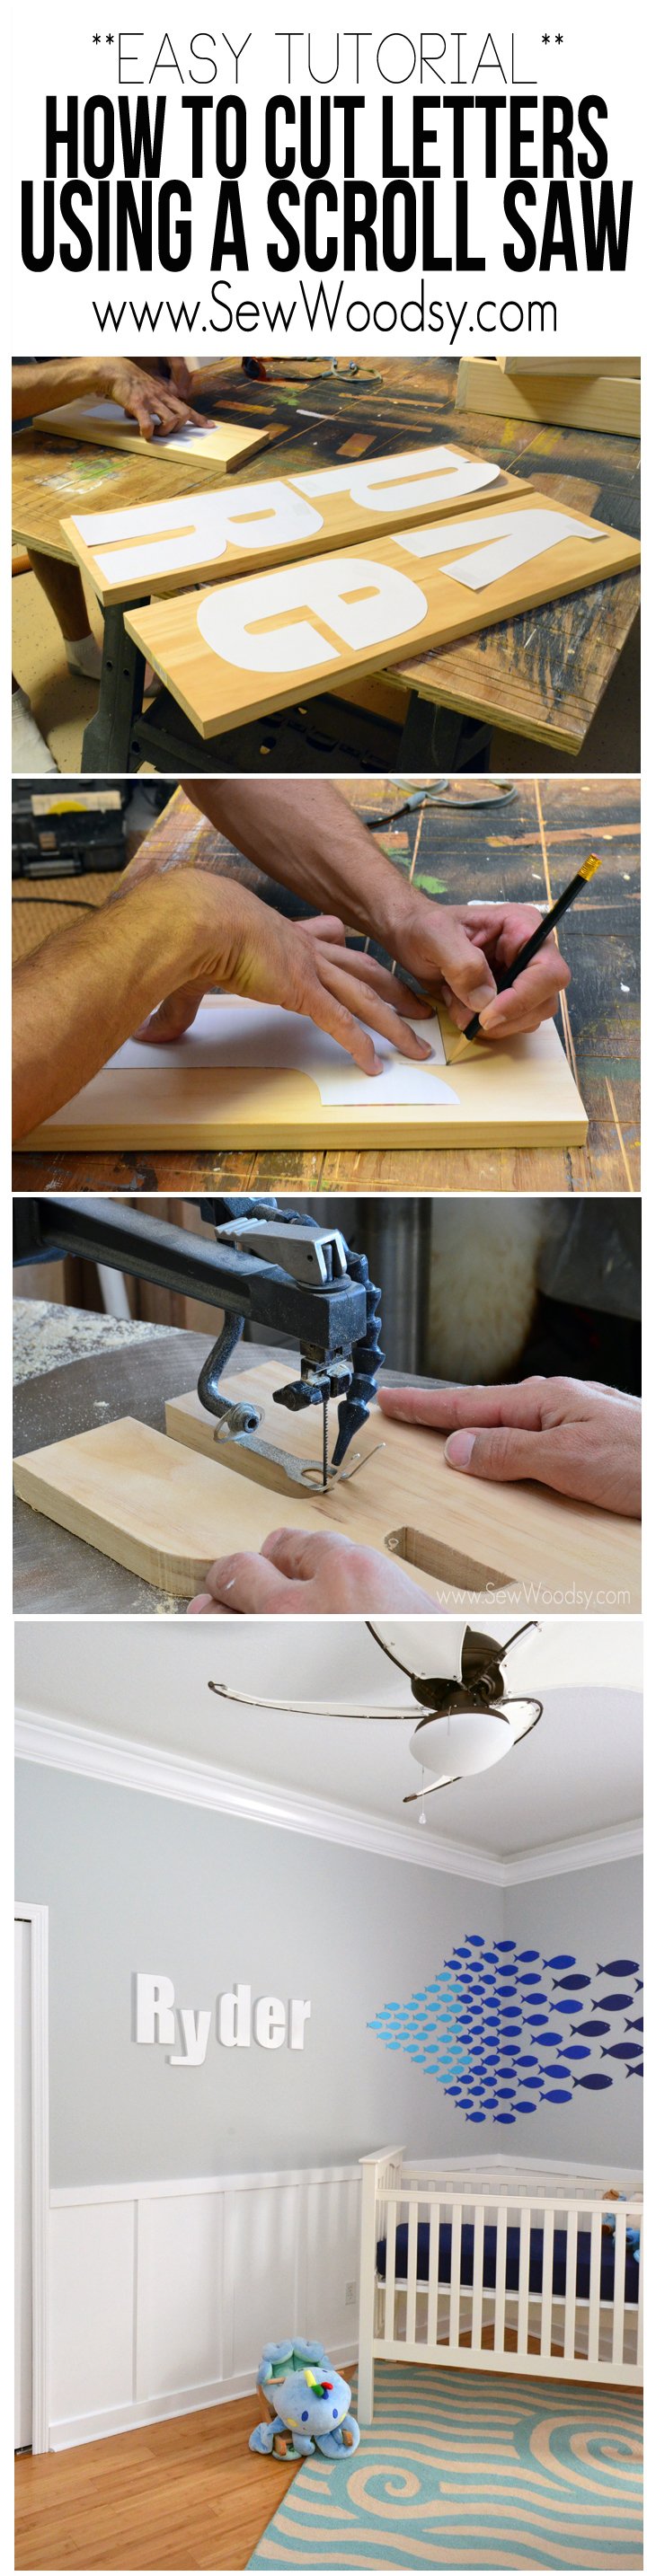 Easy Tutorial on How to Cut Letters Using a Scroll Saw #3MDIY #3MPartner